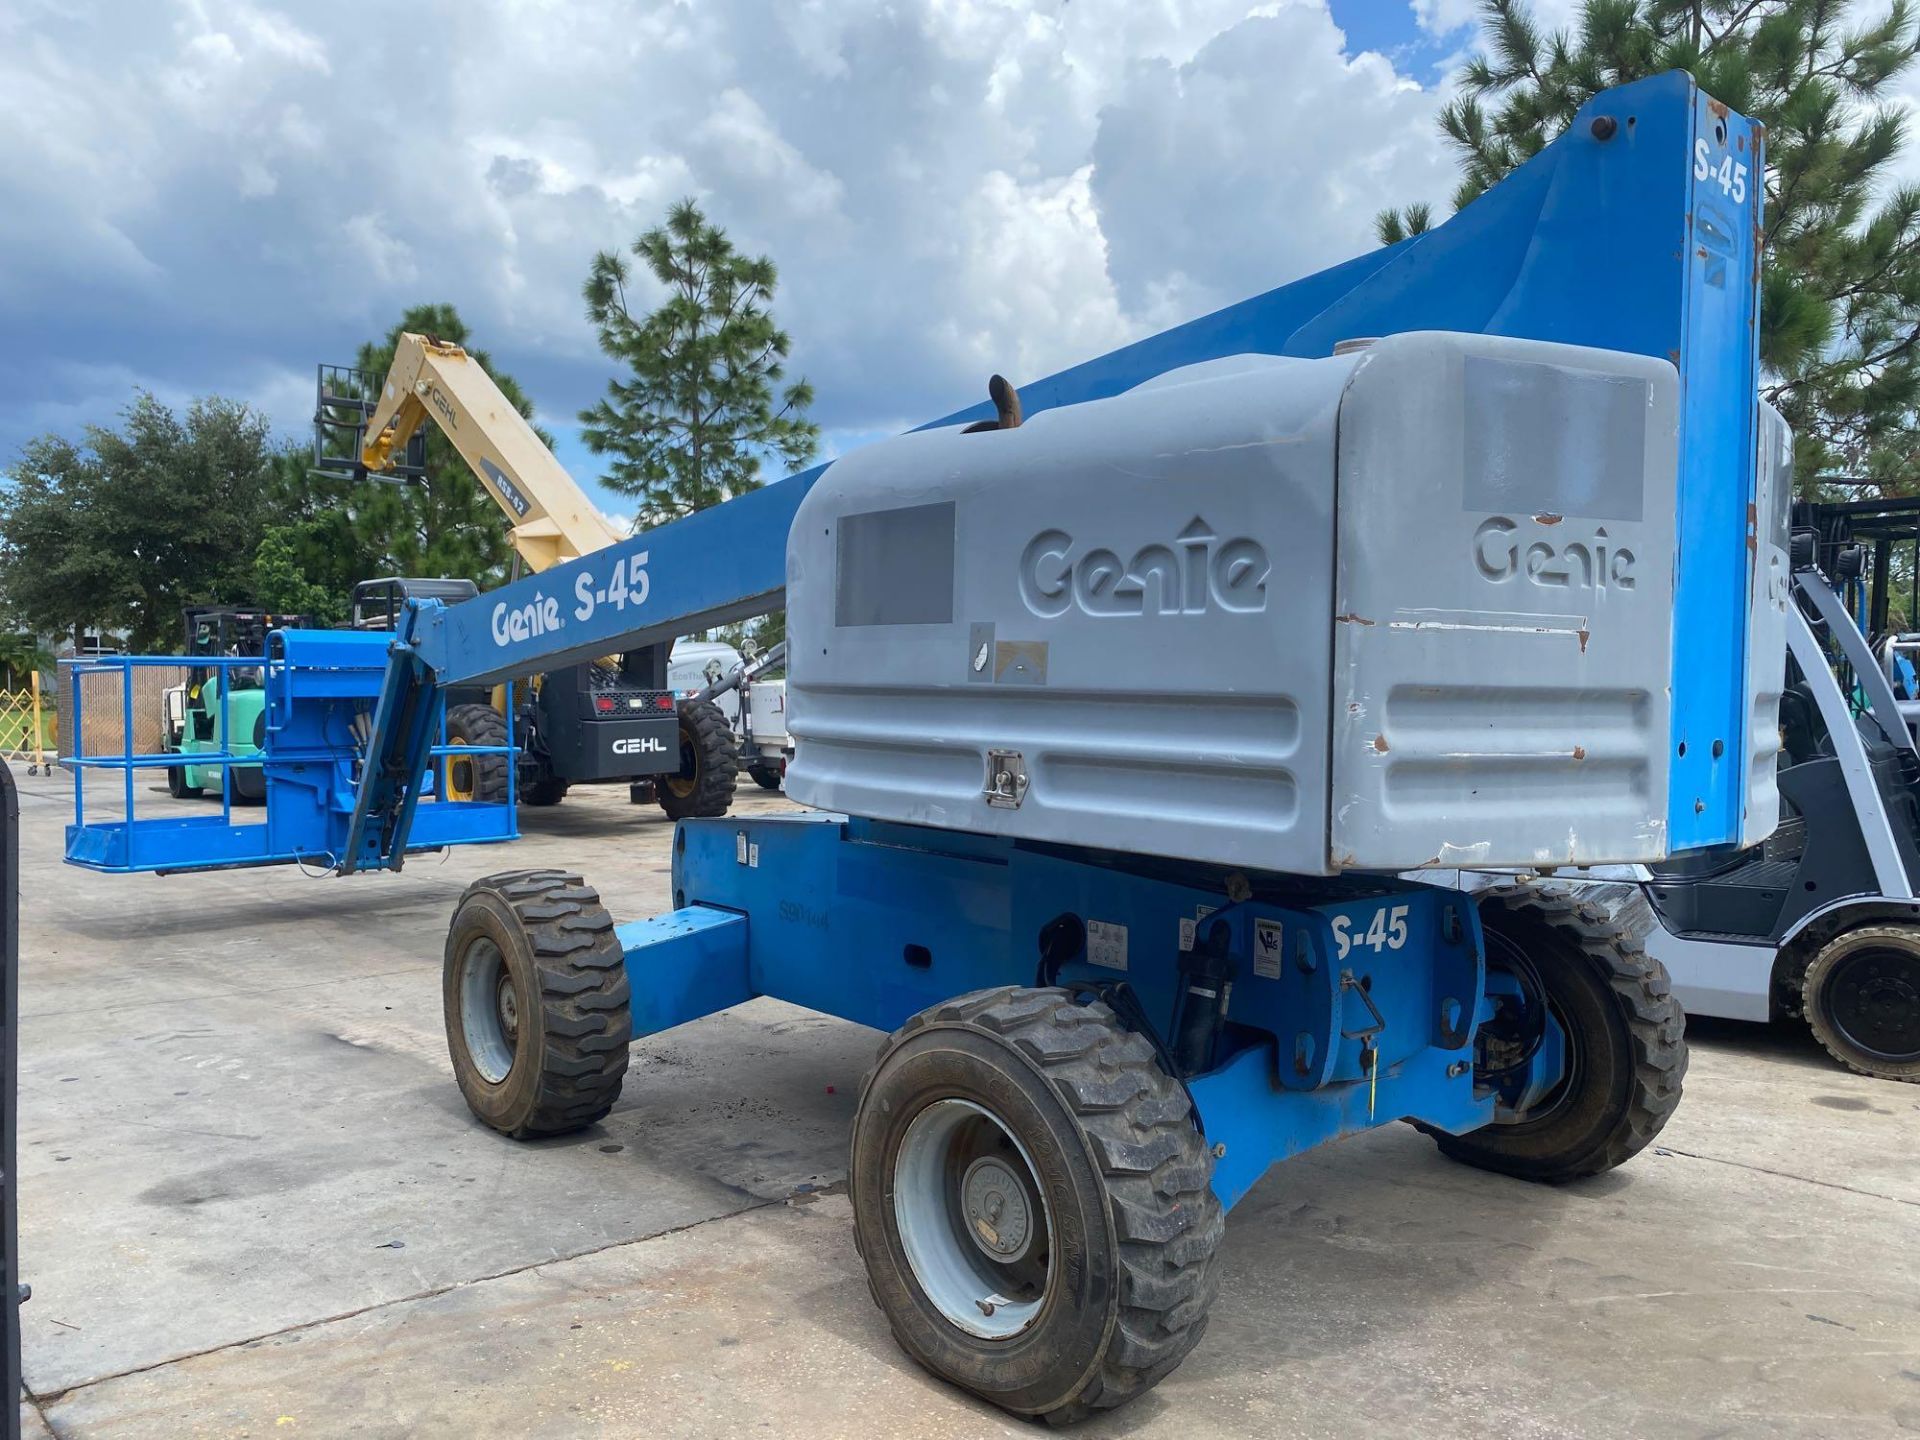 GENIE S-45 ARTICULATING DIESEL BOOM LIFT, 4x4, 45' PLATFORM HEIGHT, RUNS AND OPERATES - Image 6 of 12